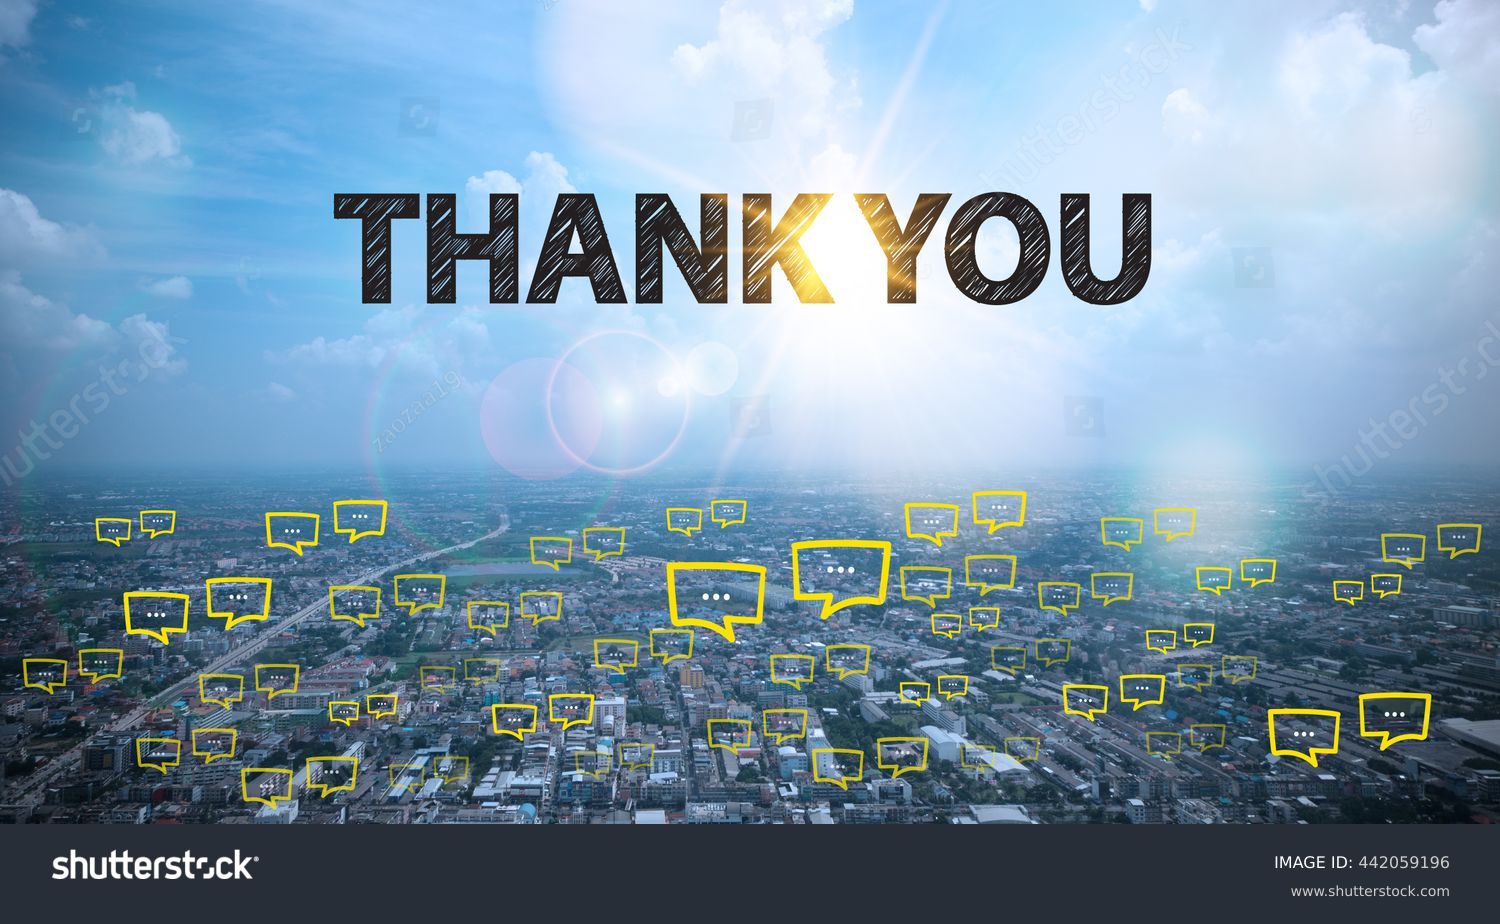 THANK YOU text on city and sky background with bubble chat ,business analysis and strategy as concept